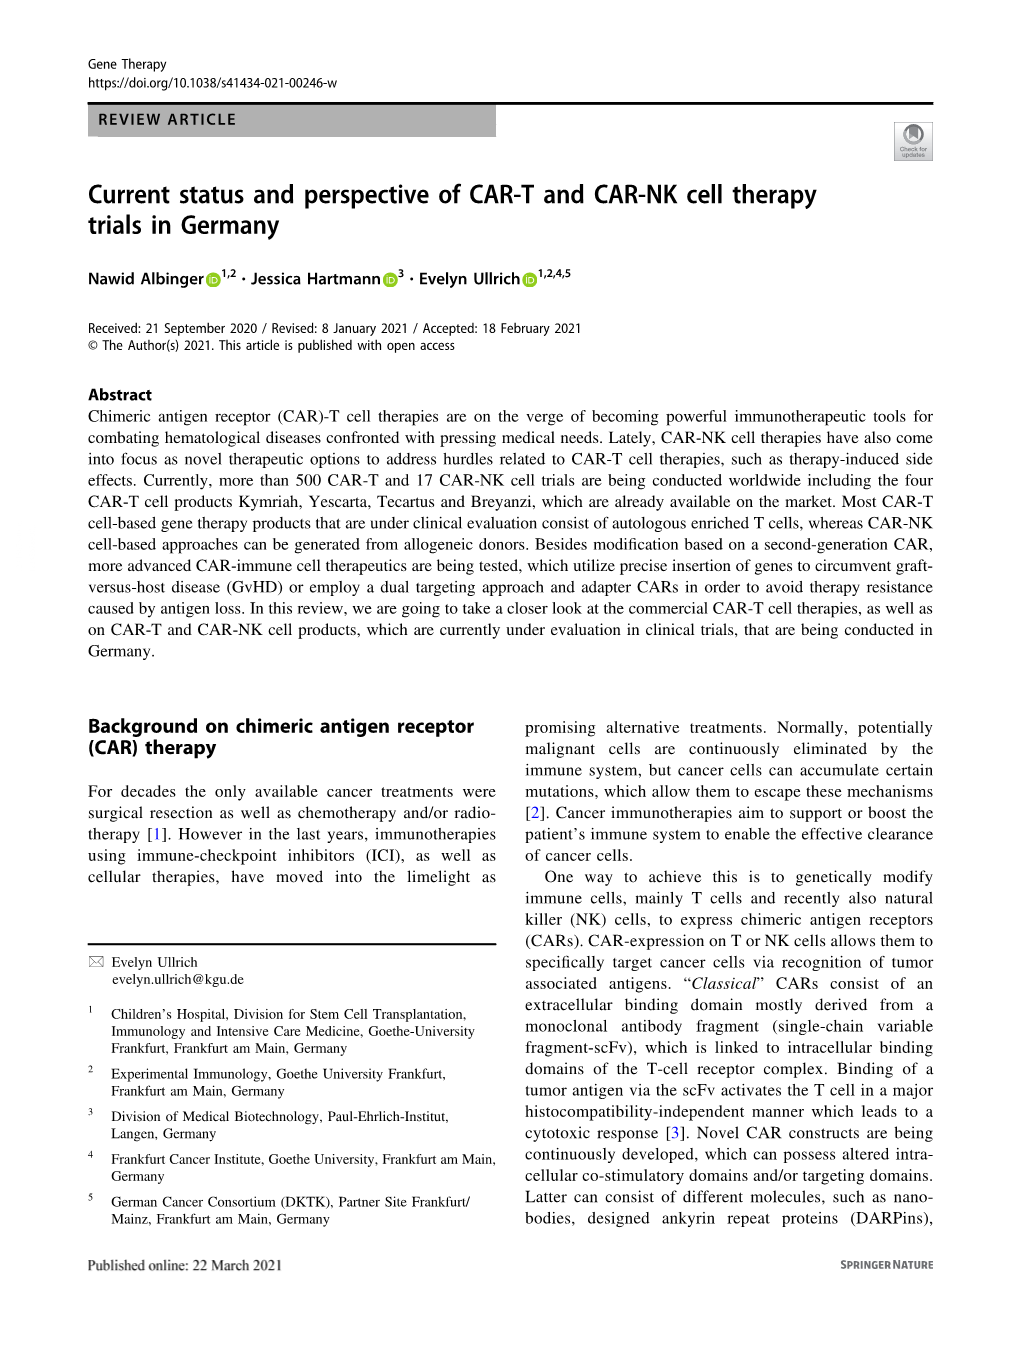 Current Status and Perspective of CAR-T and CAR-NK Cell Therapy Trials in Germany